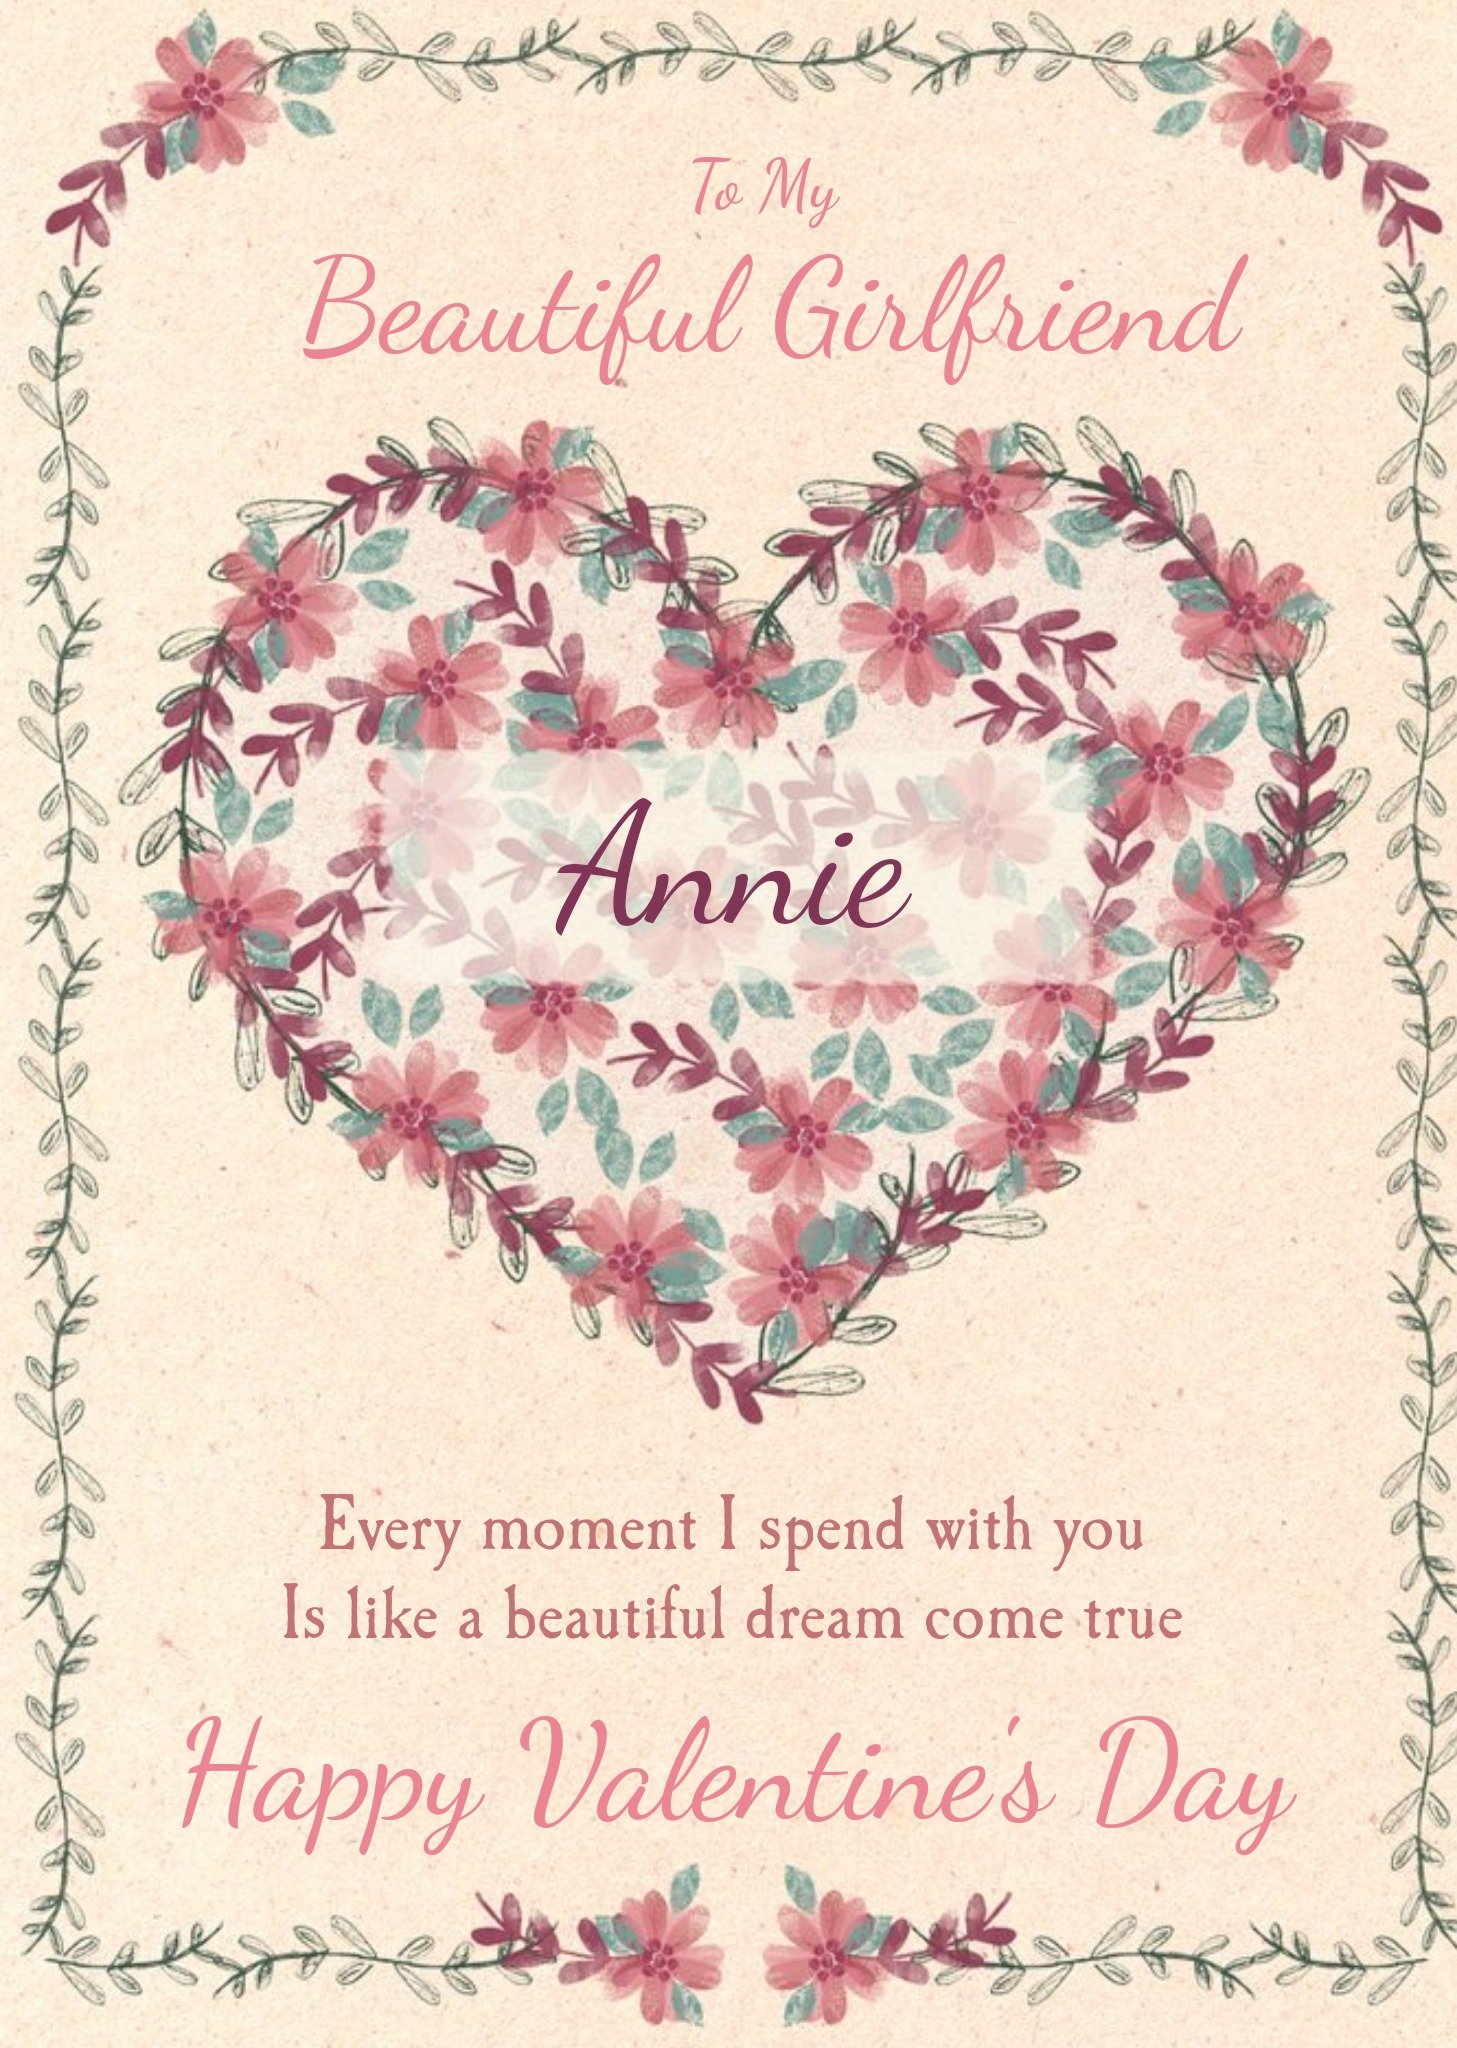 Moonpig Floral Heart Dream Come True Valentine's Day Girlfriend Card, Large